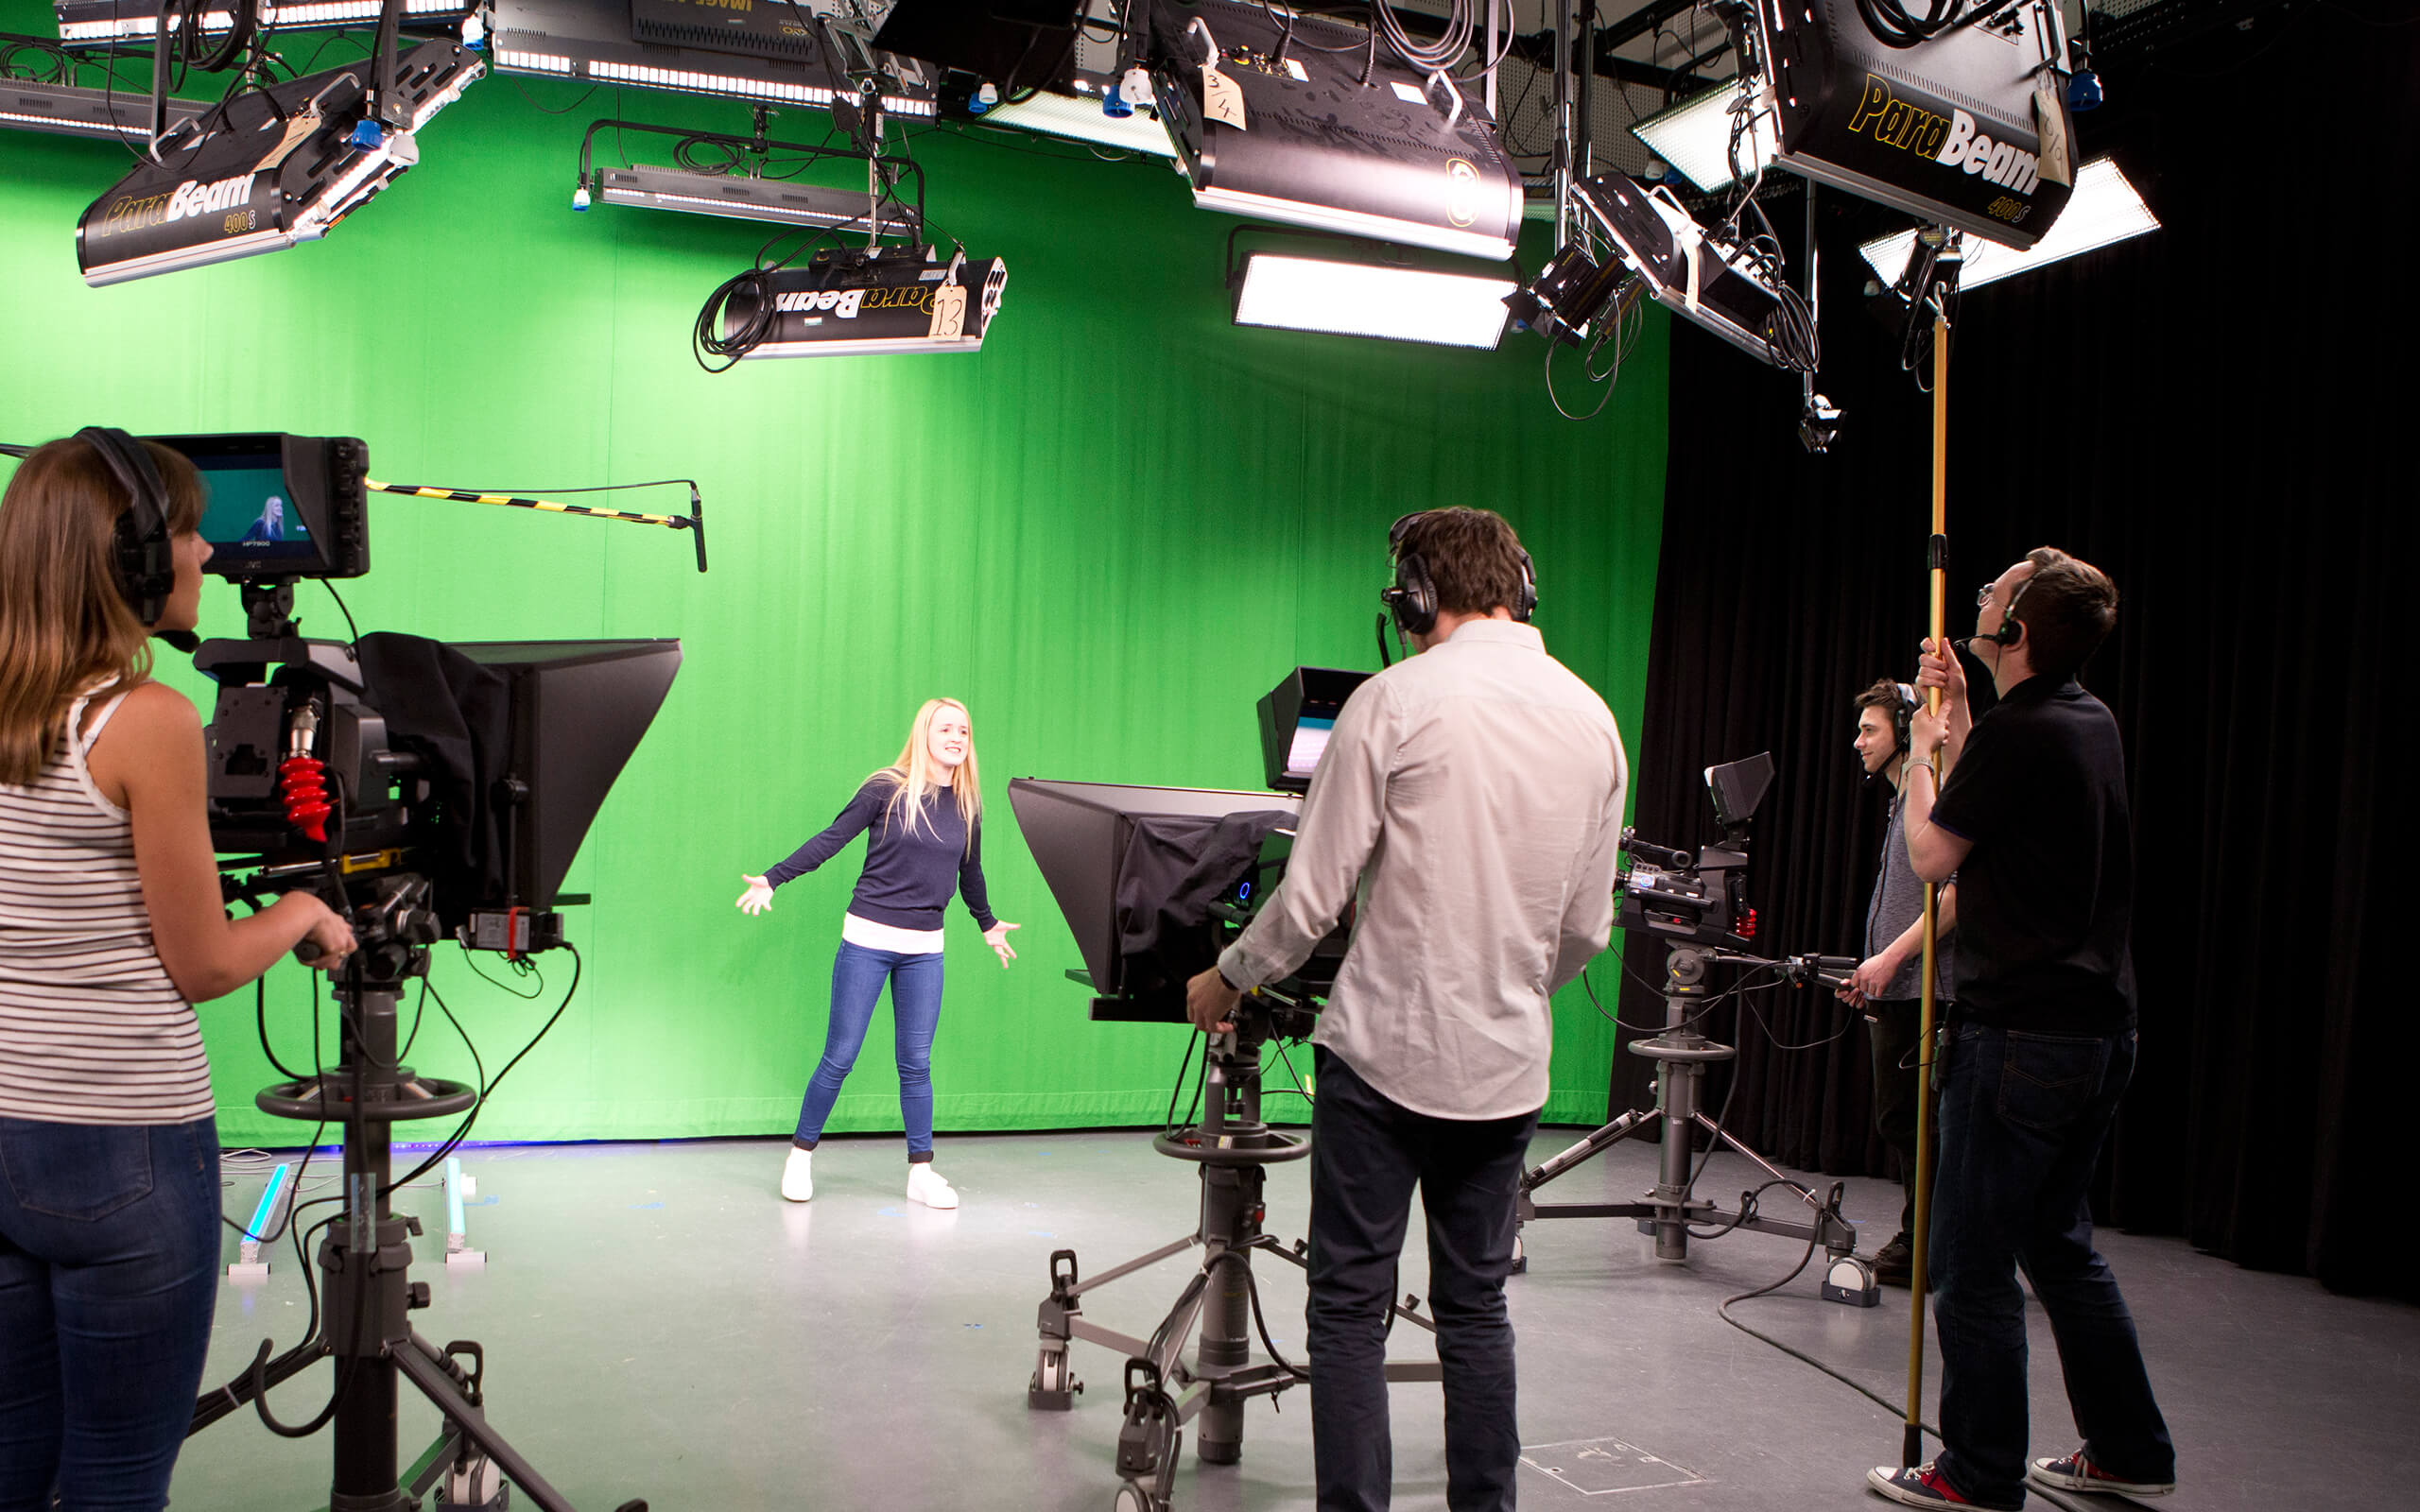 Ayr Campus Facilities | UWS Student on Green Screen | University of the West of Scotland